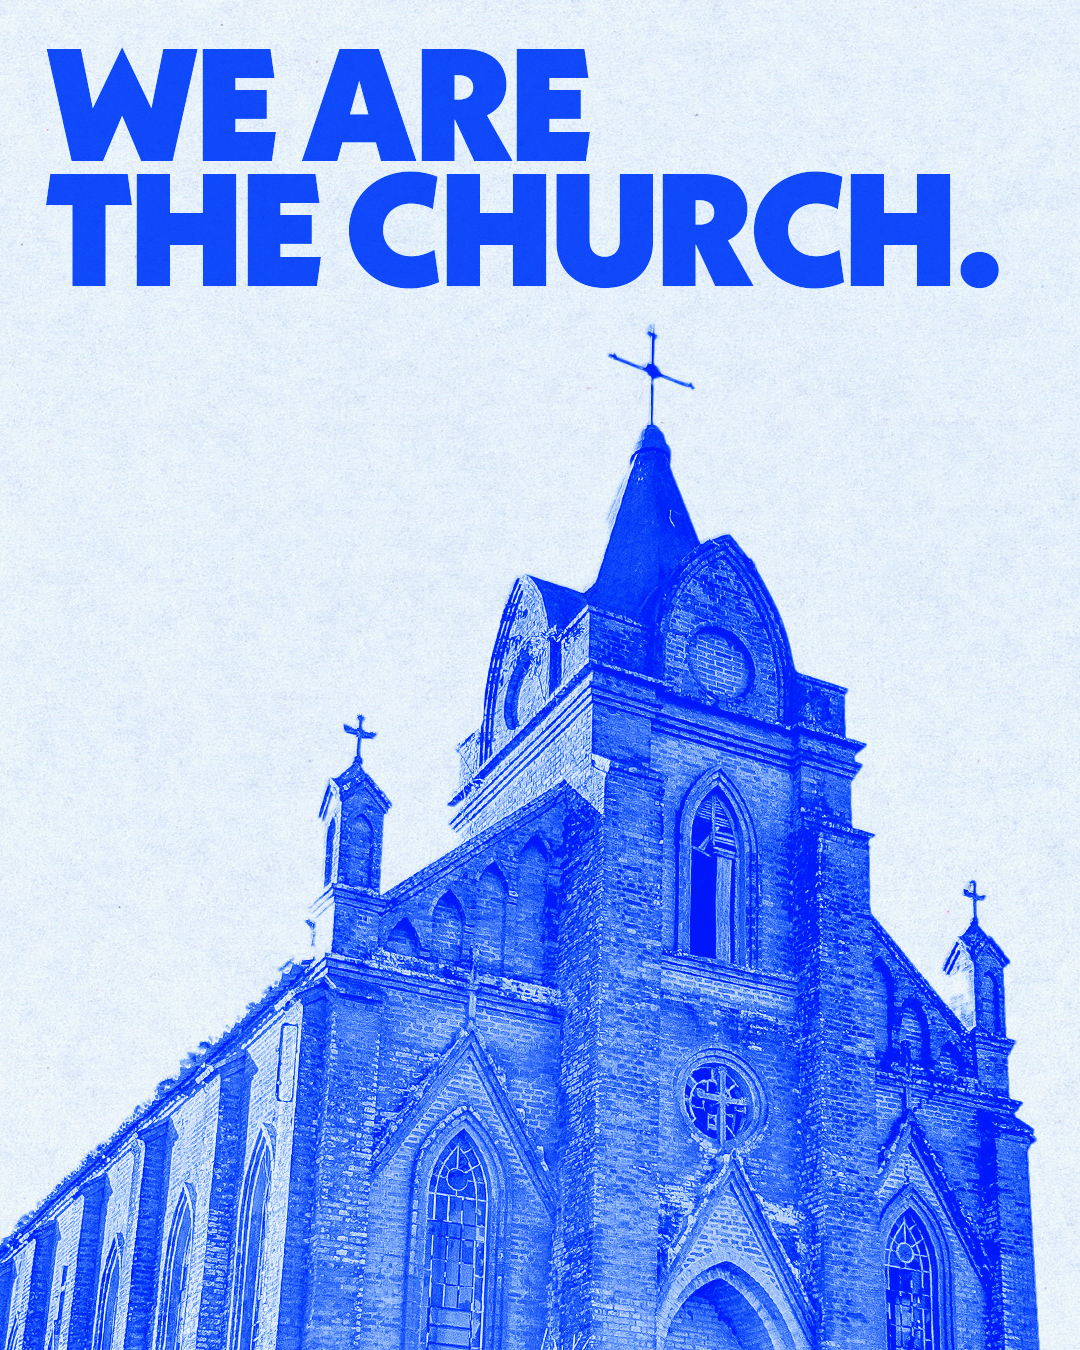 We are the church.